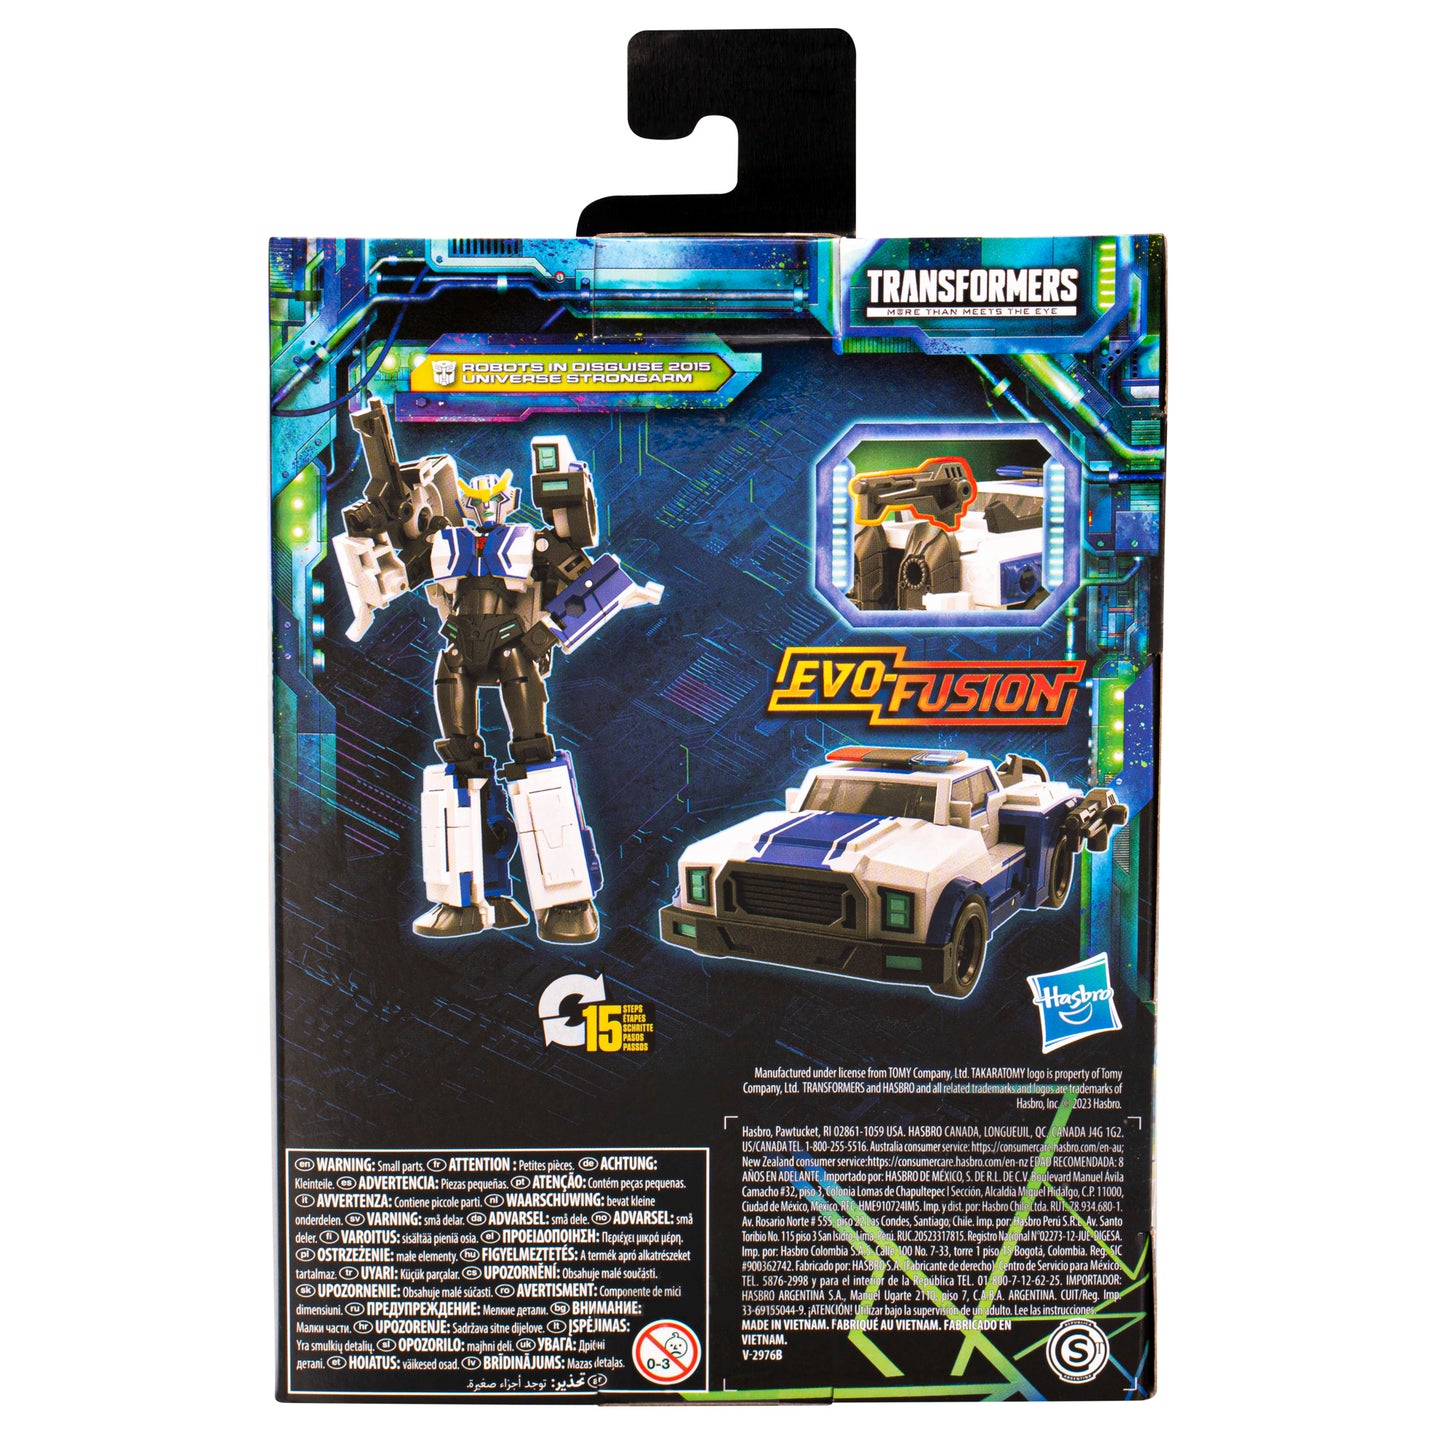 Universe Strongarm Action Figure Toy in a package back view - Heretoserveyou